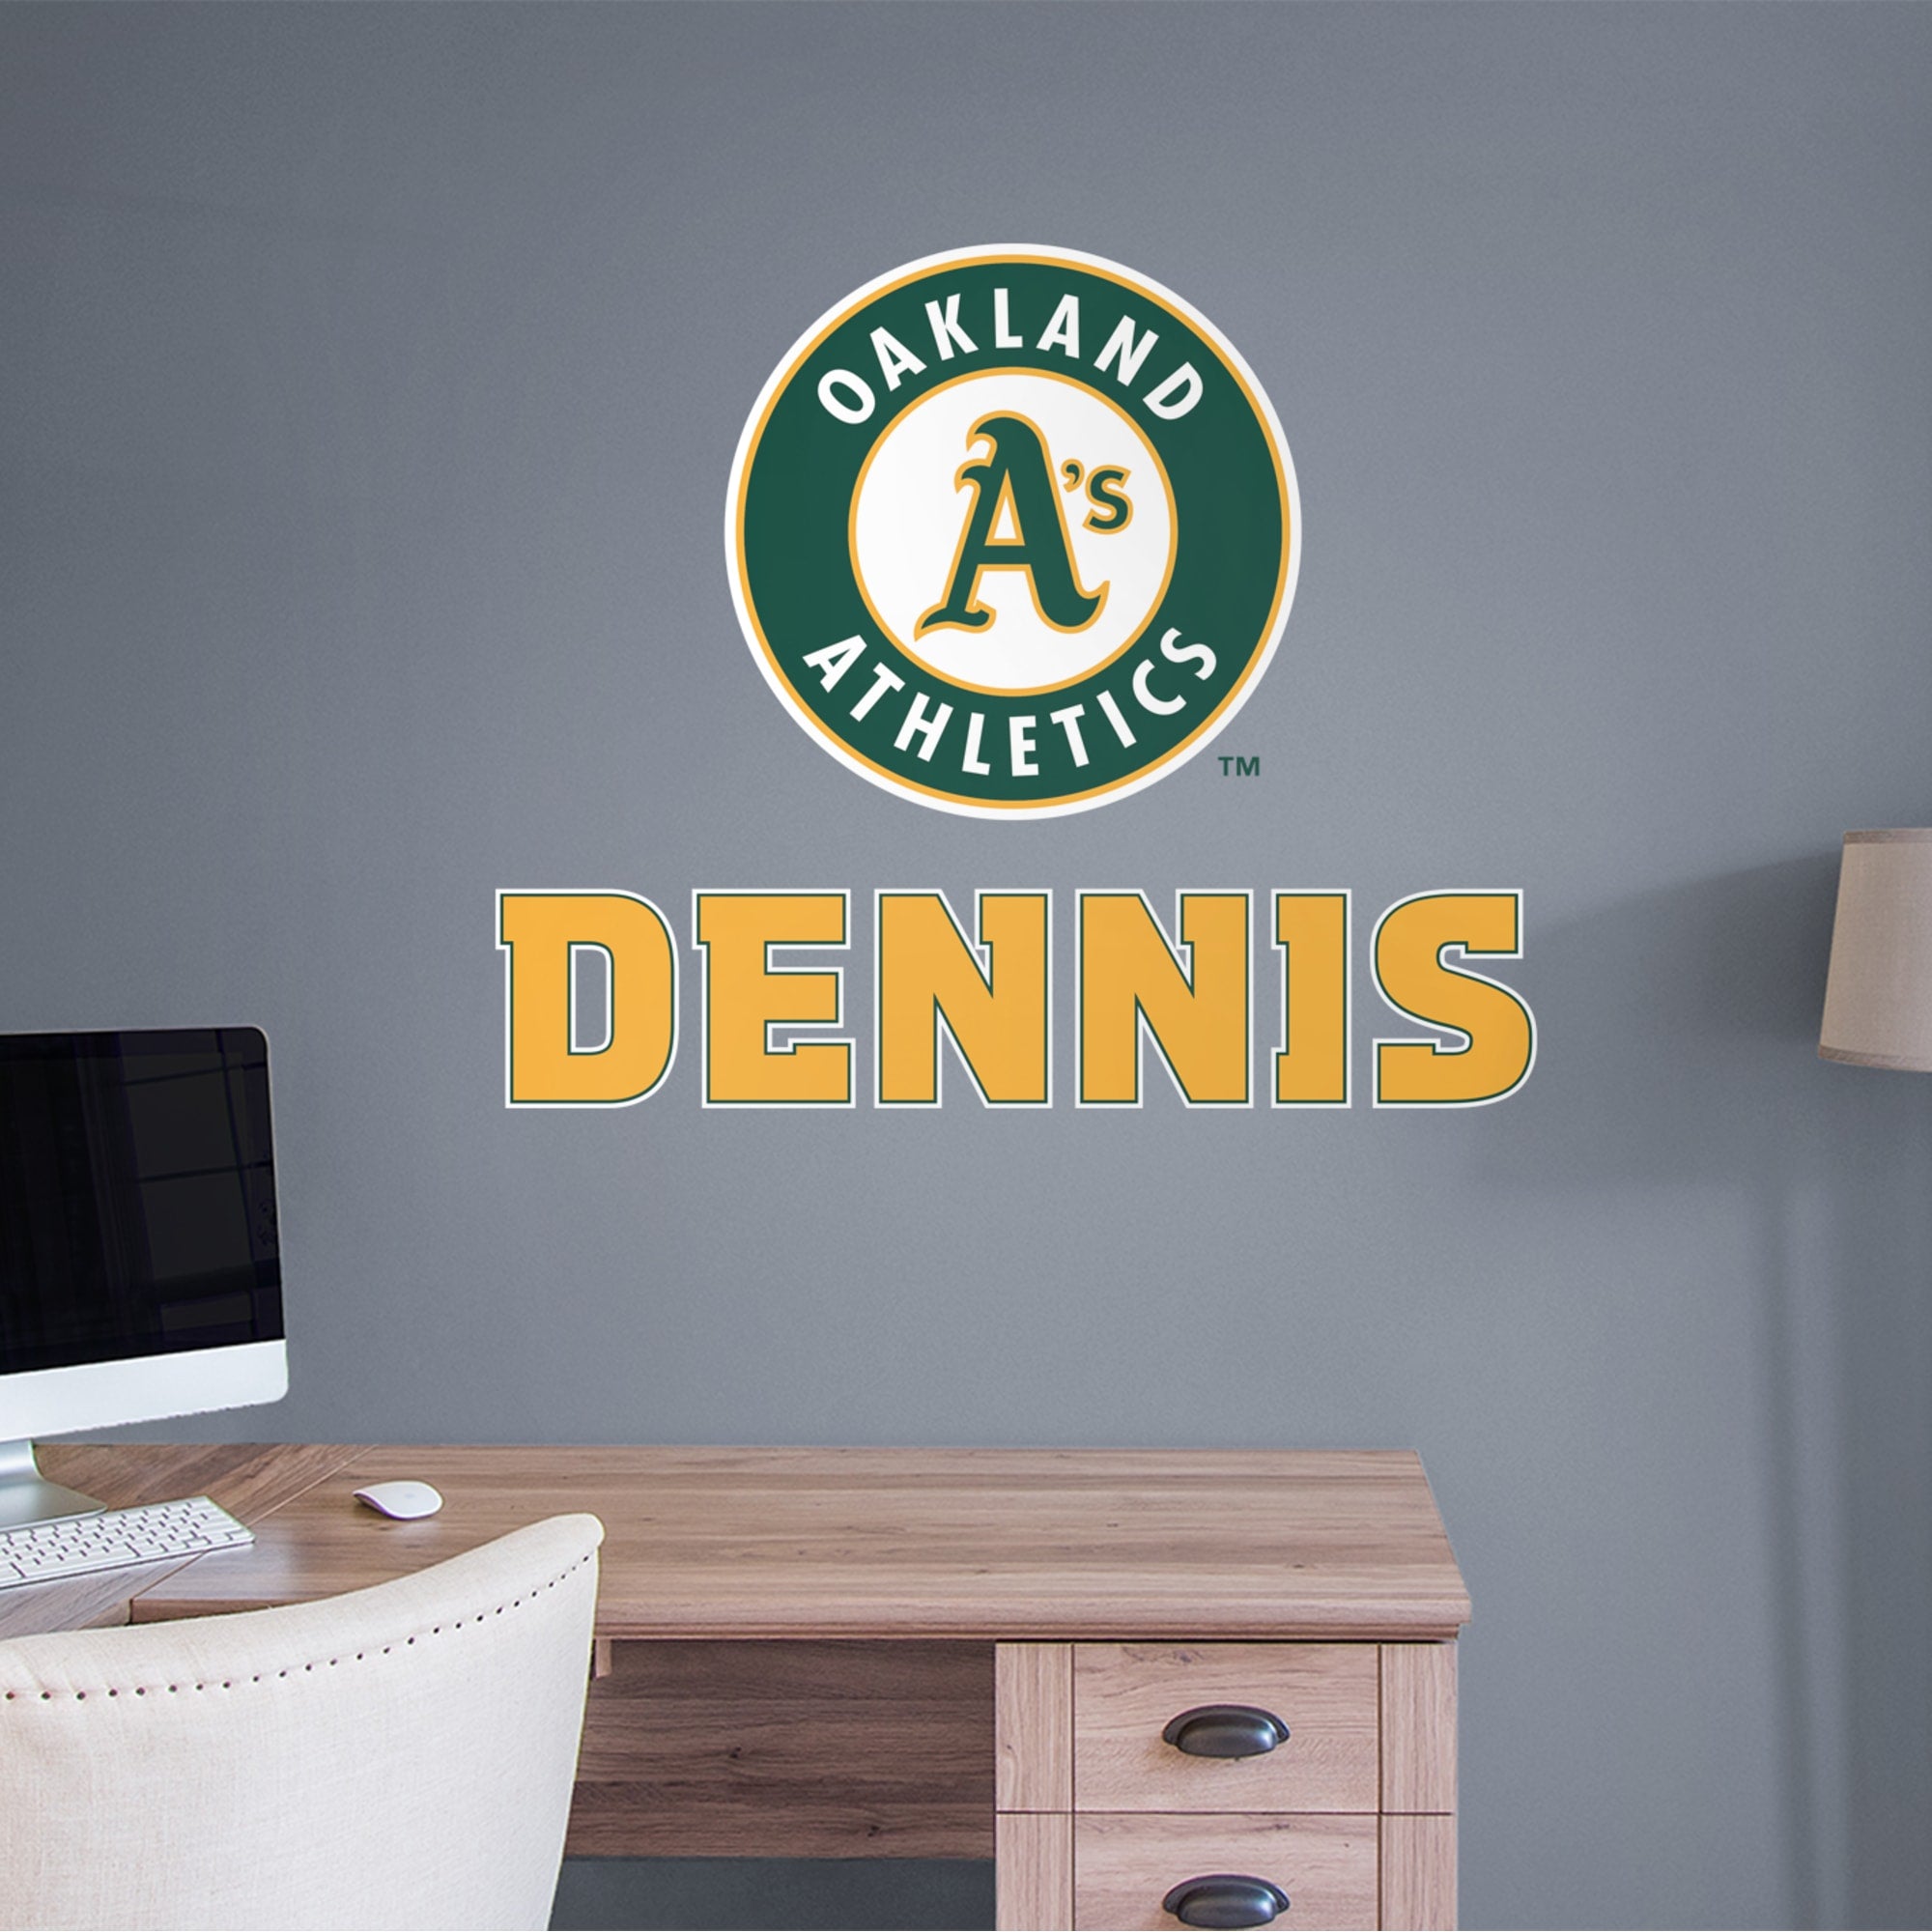 Oakland Athletics: Stacked Personalized Name - Officially Licensed MLB Transfer Decal in Yellow by Fathead | Vinyl